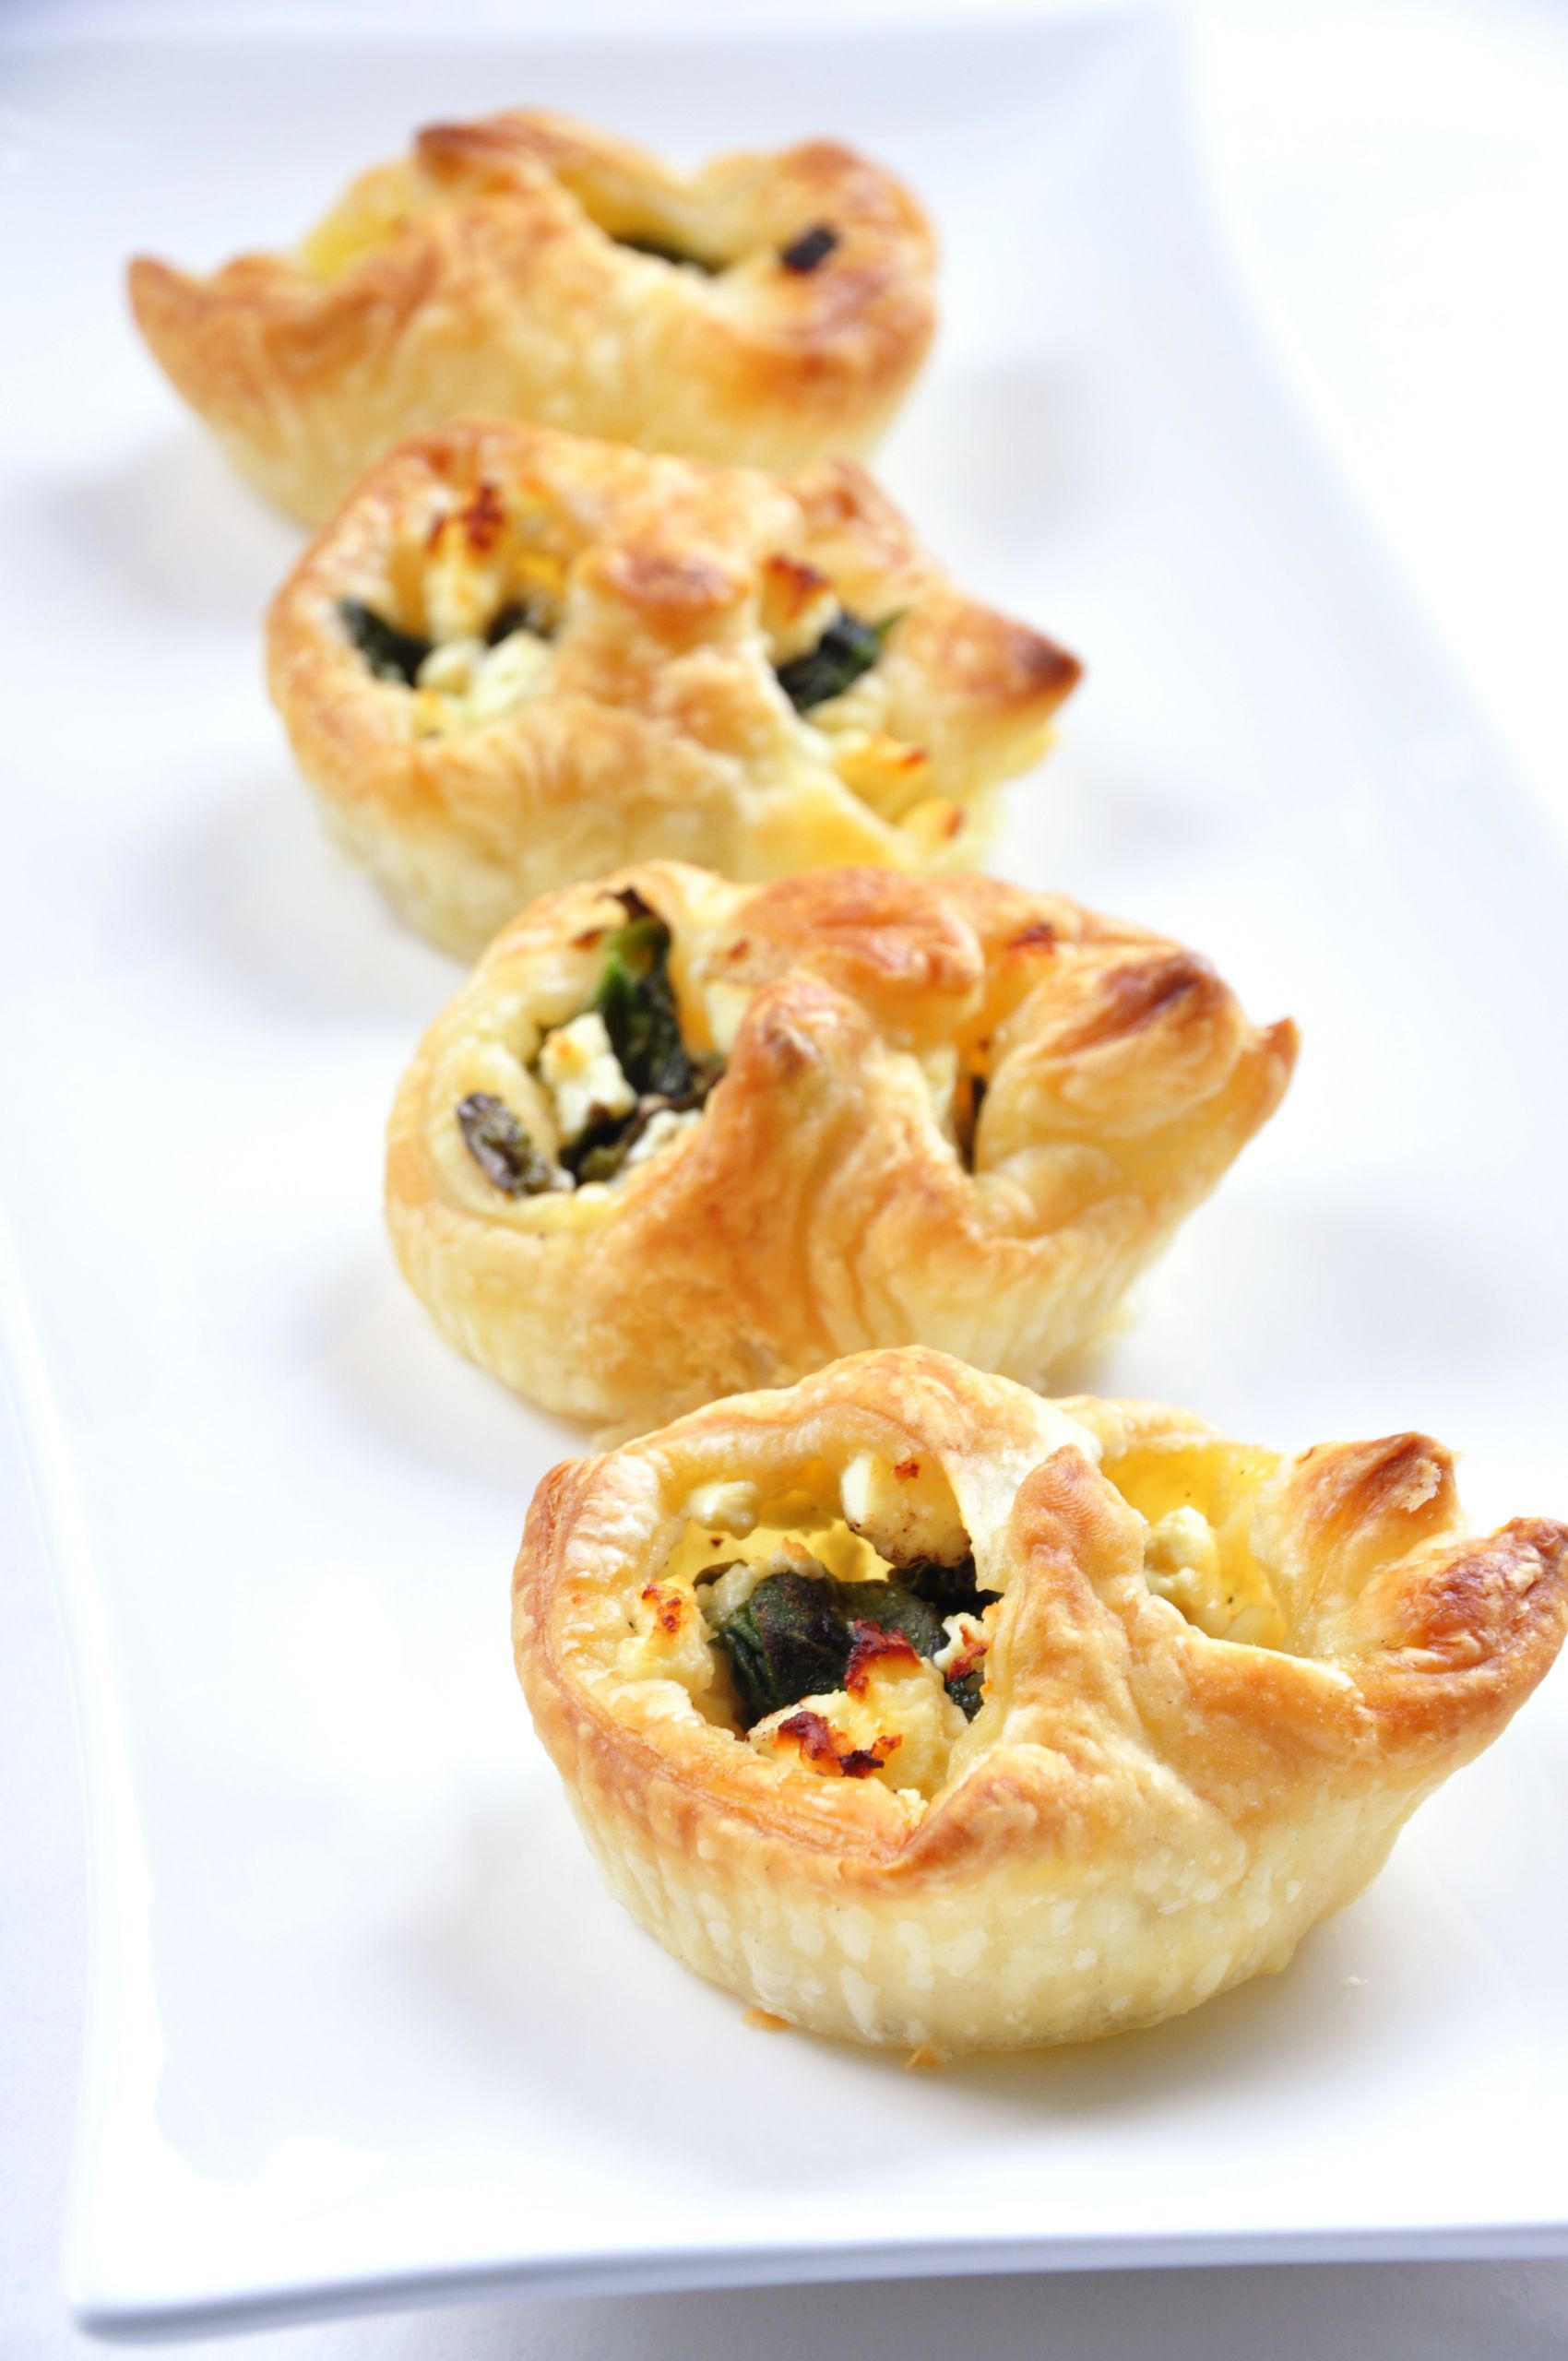 Puffed Pastry Appetizers Recipes Best Of Puff Pastry Appetizers Sutter buttes Olive Oil Pany